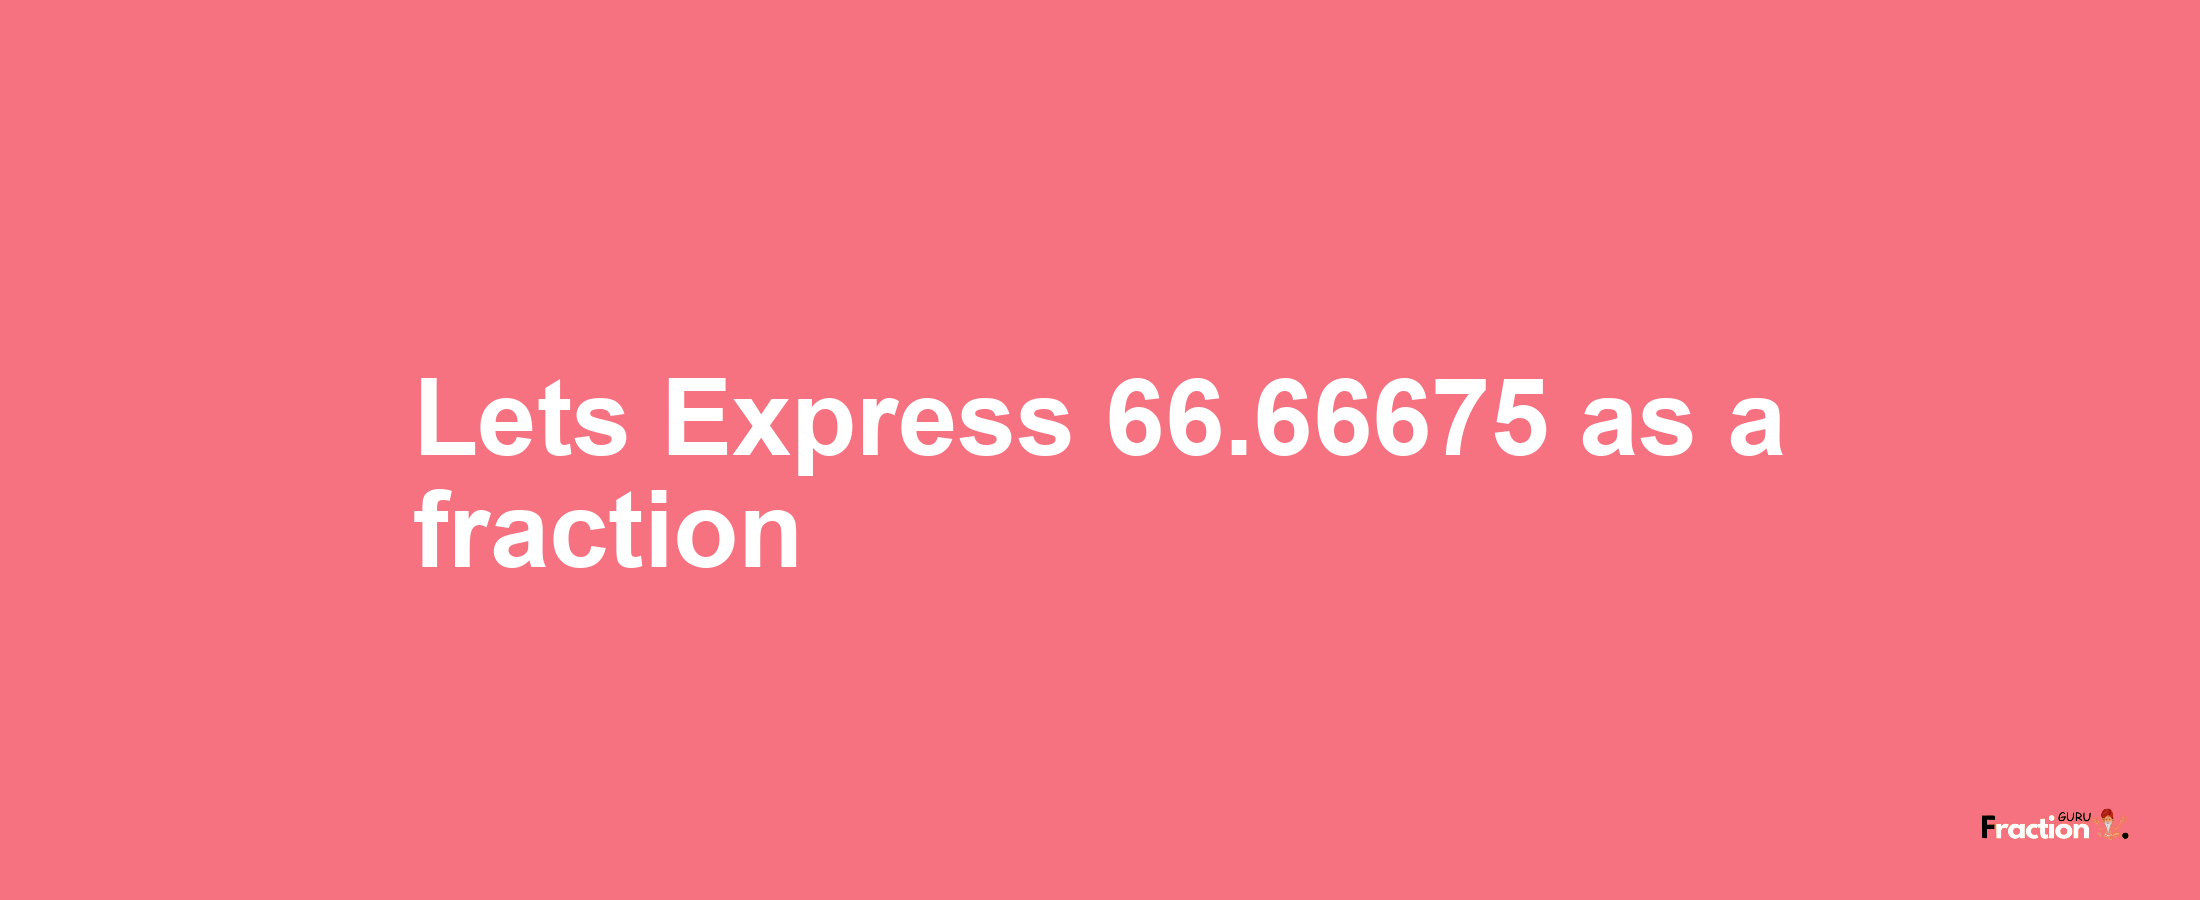 Lets Express 66.66675 as afraction